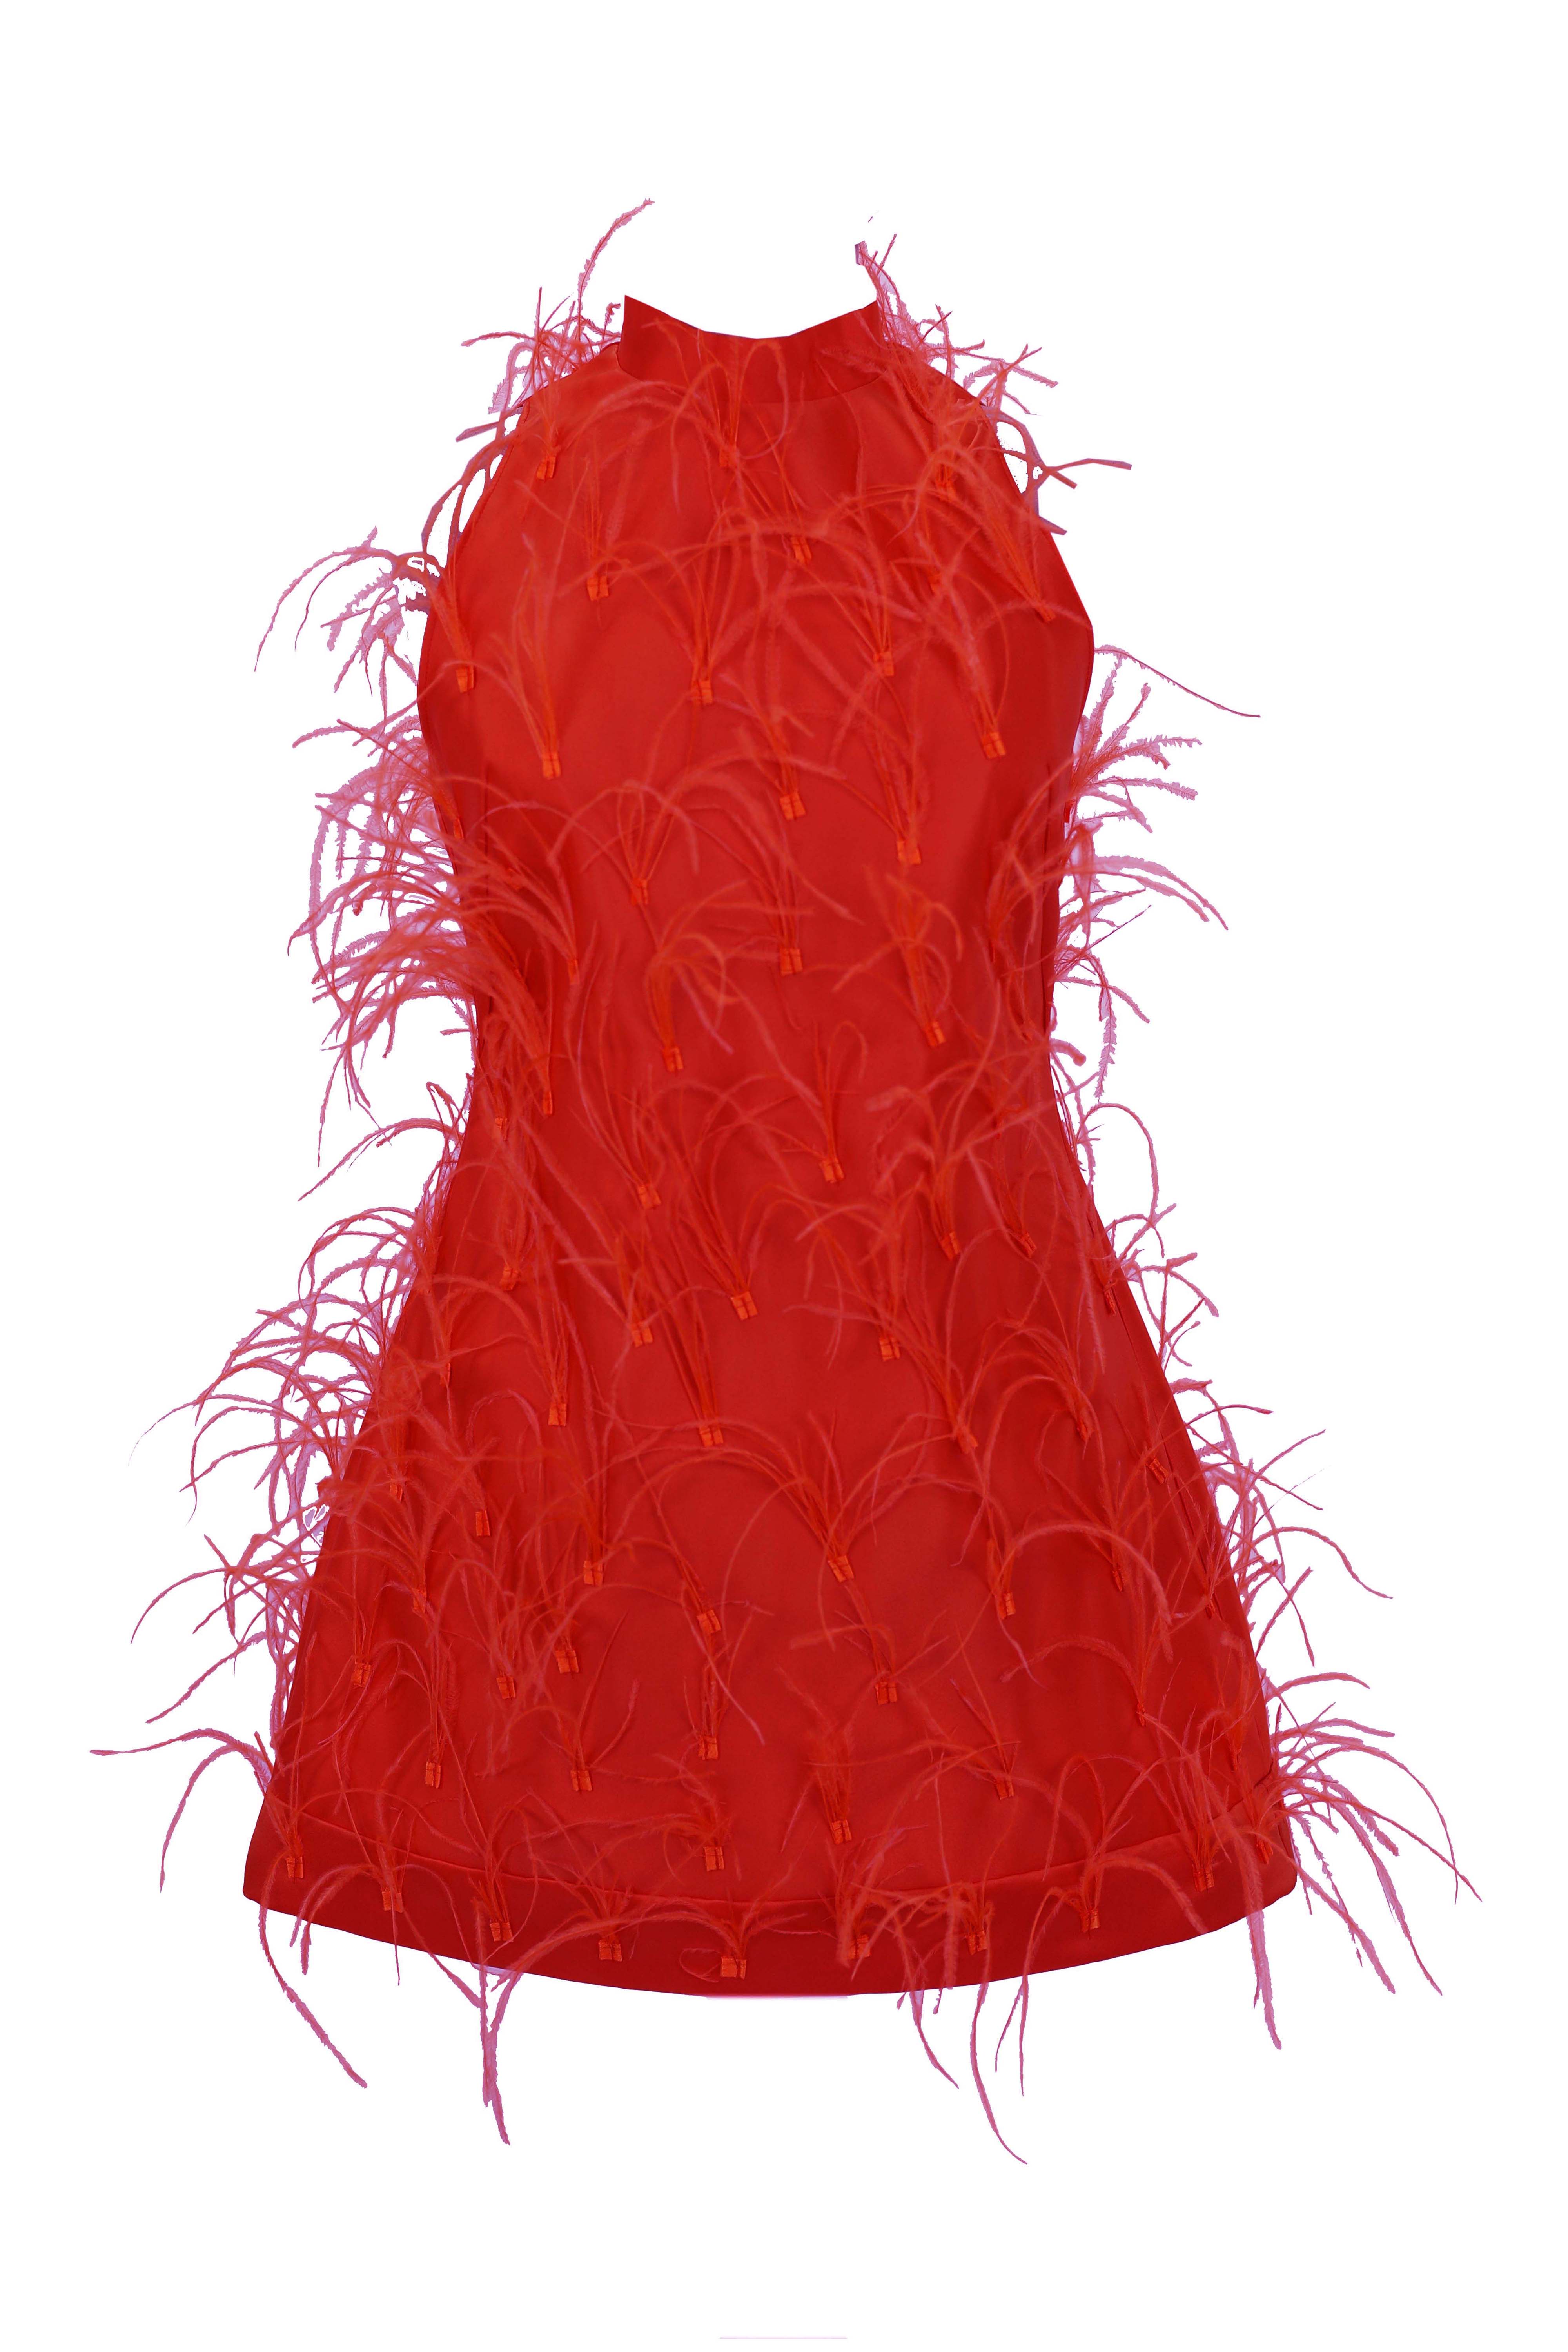 R23101 - RED 01 - ALMEEA red mini dress with feathers - AMBAR STUDIO